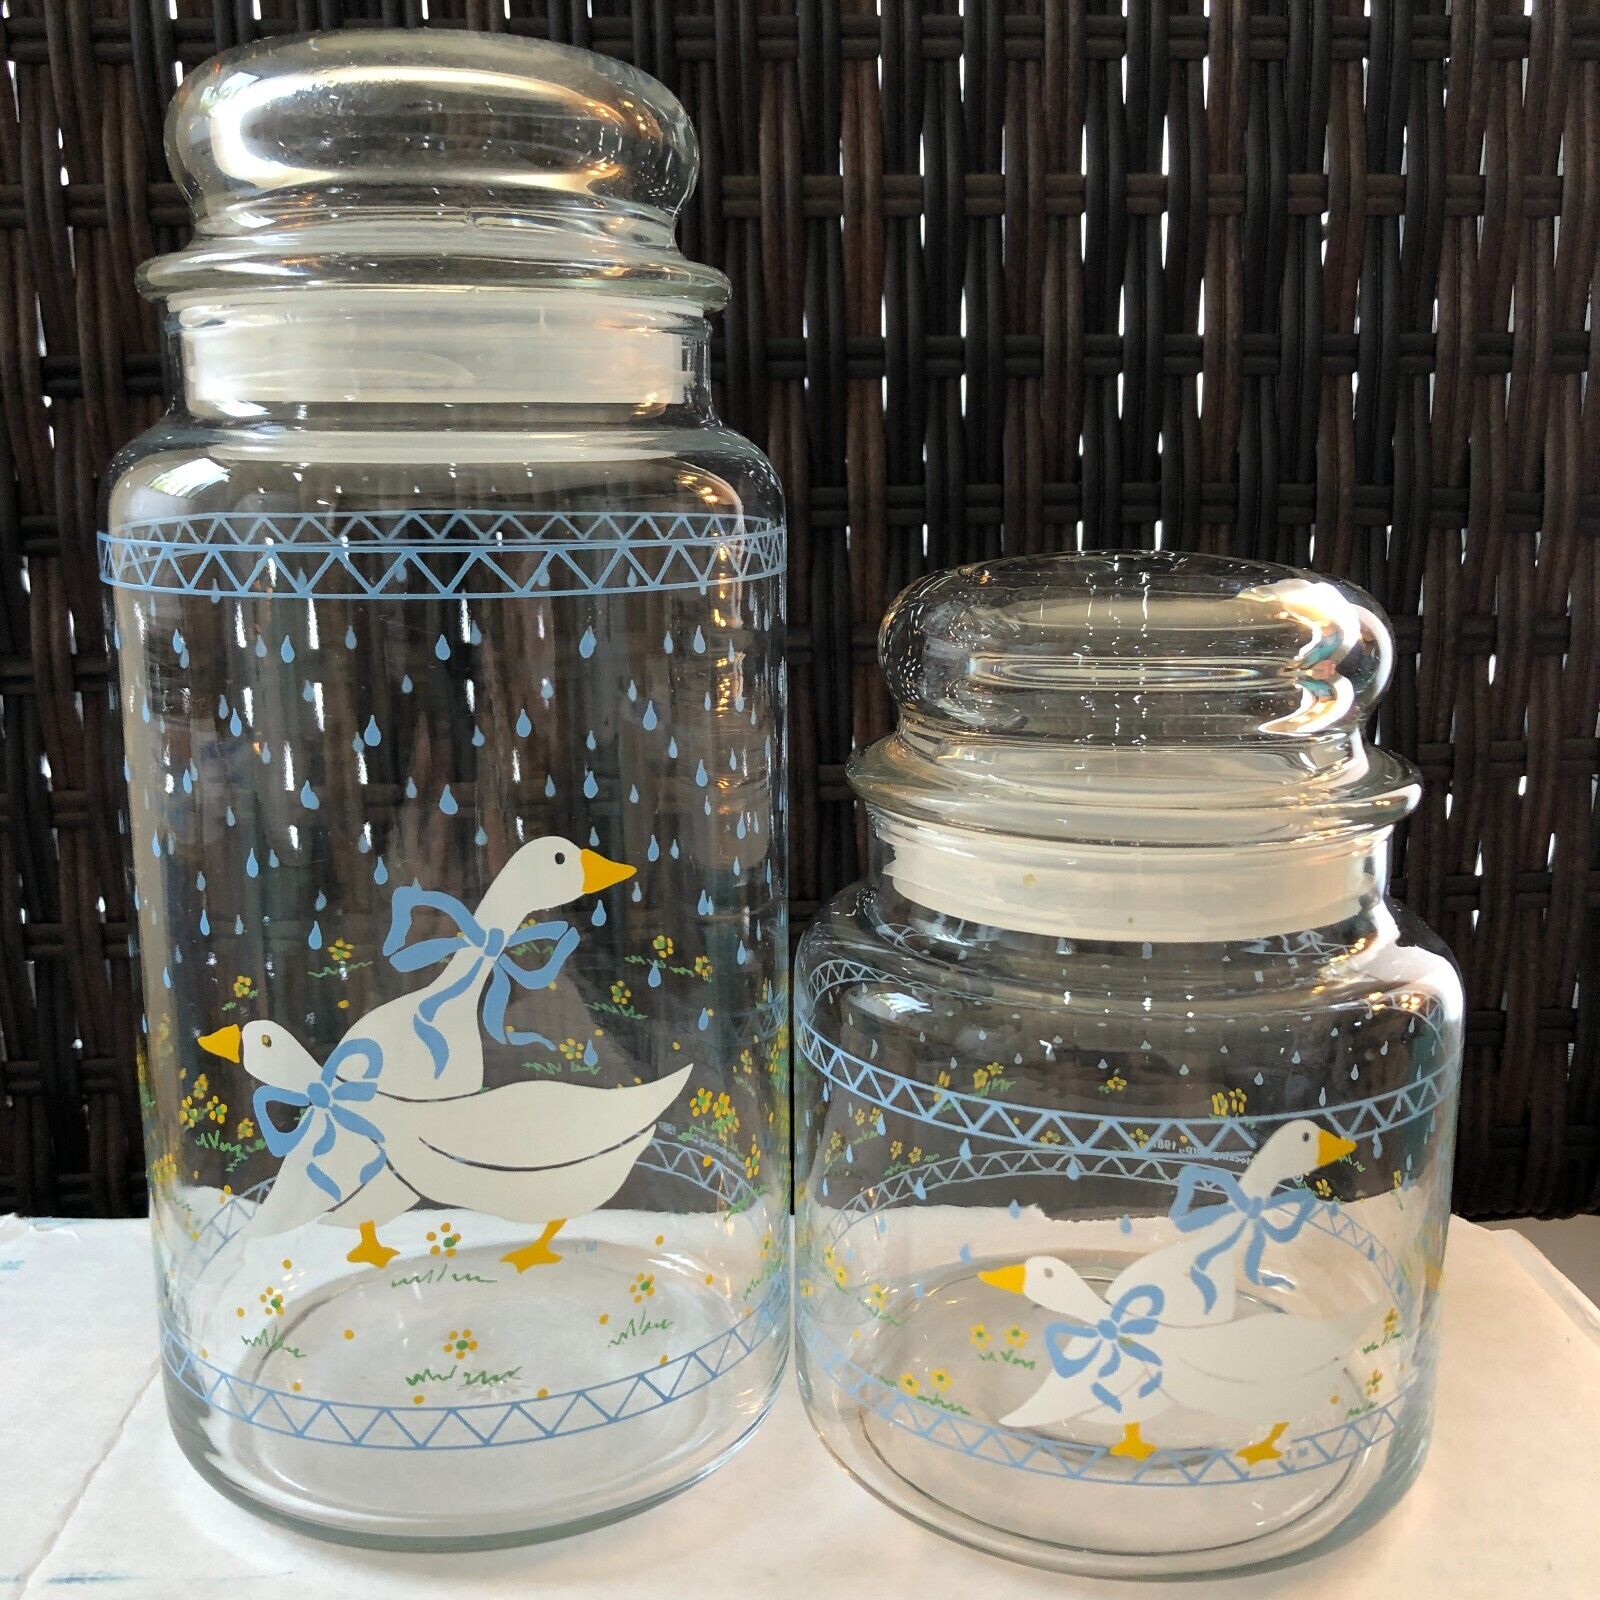 2 Vintage Country Geese Goose 1980s Blue Ribbon Libbey Canisters w/Lids.